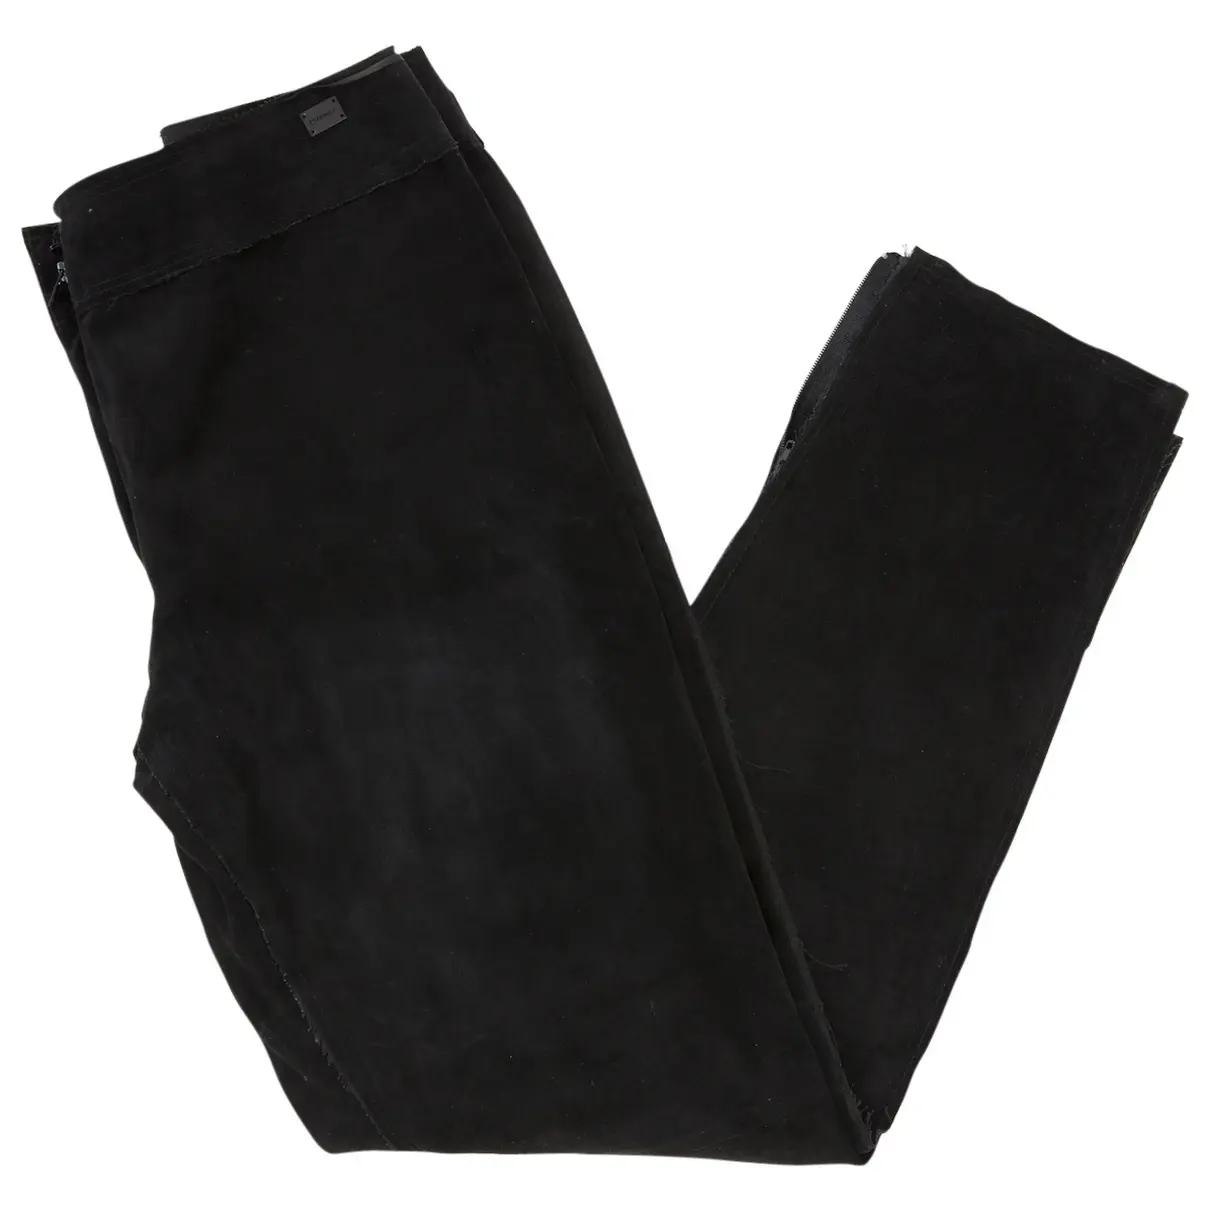 Buy Chanel Straight pants online